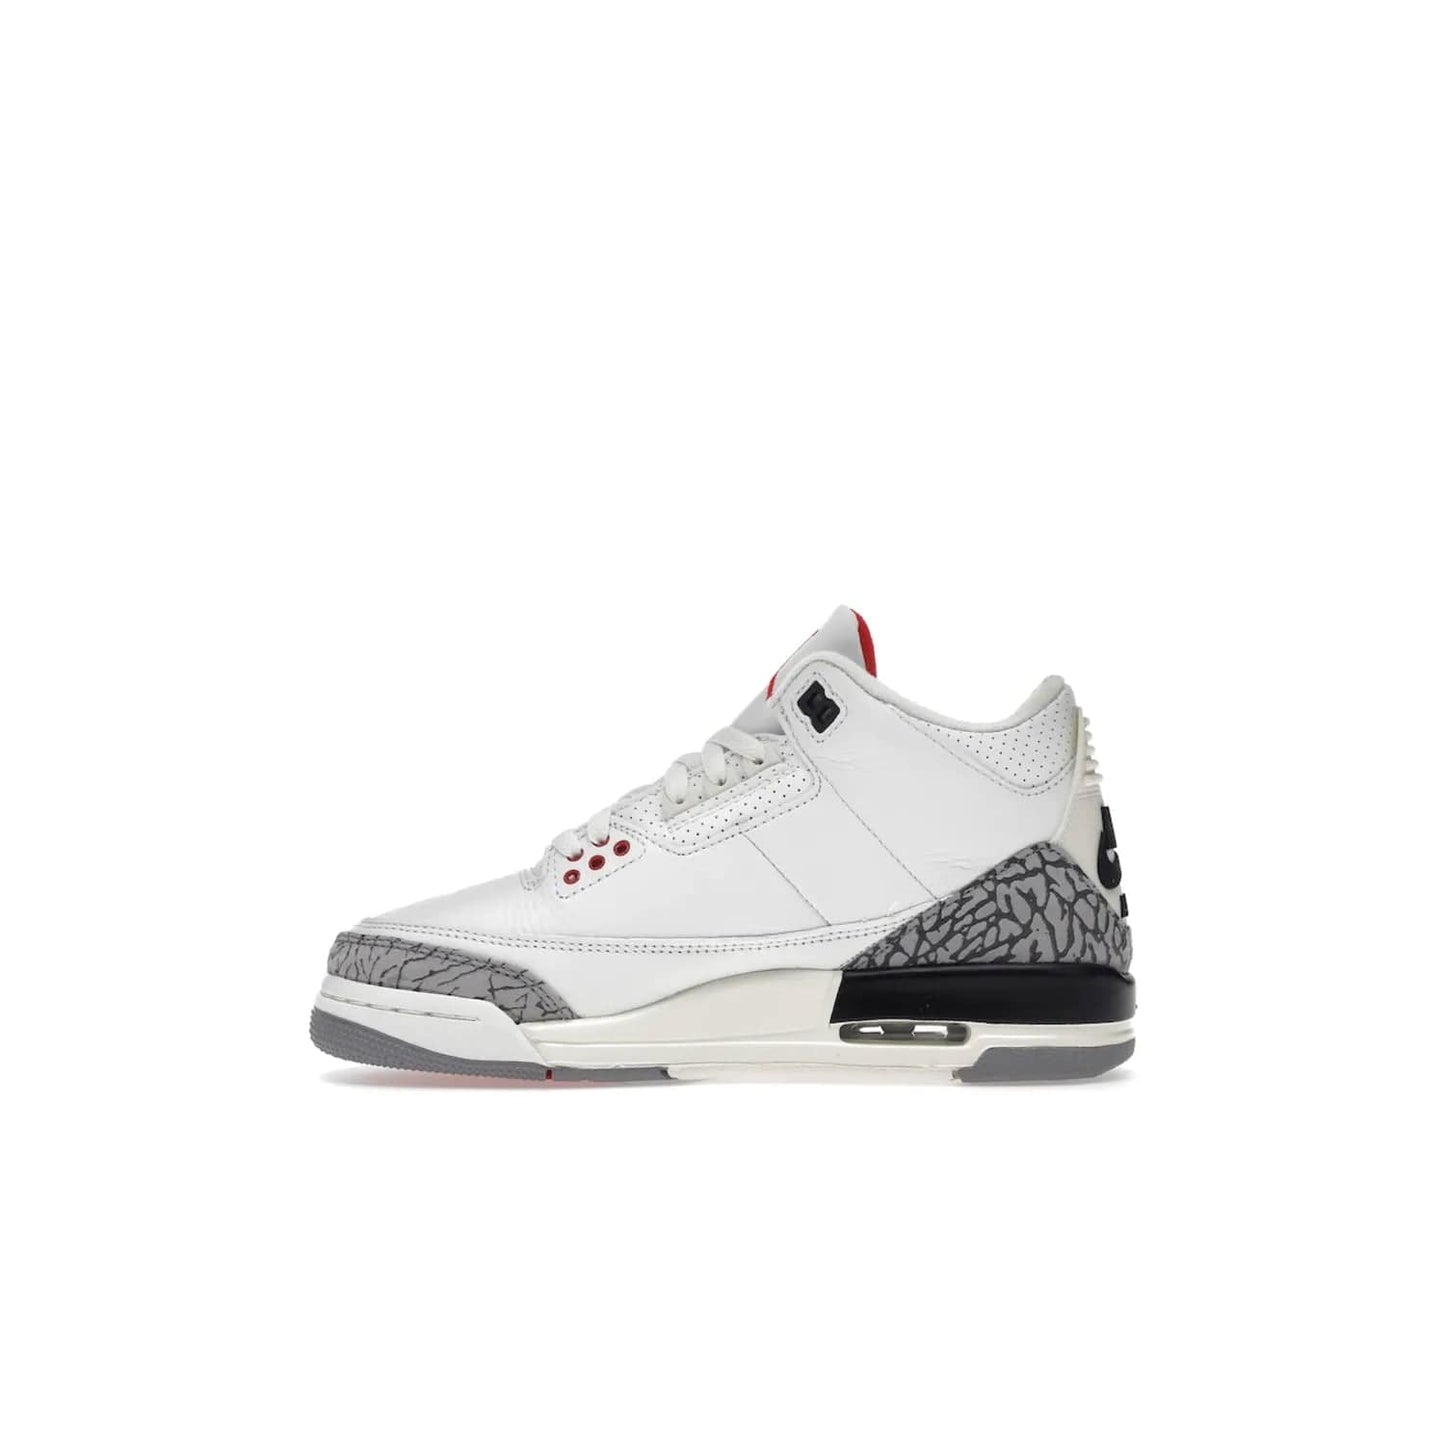 Jordan 3 Retro White Cement Reimagined (GS) - Image 19 - Only at www.BallersClubKickz.com - Grab the perfect blend of modern design and classic style with the Jordan 3 Retro White Cement Reimagined (GS). Features Summit White, Fire Red, Black, and Cement Grey colorway, iconic Jordan logo embroidered on the tongue, and “Nike Air” branding. Limited availability, get your pair before March 11th 2023.